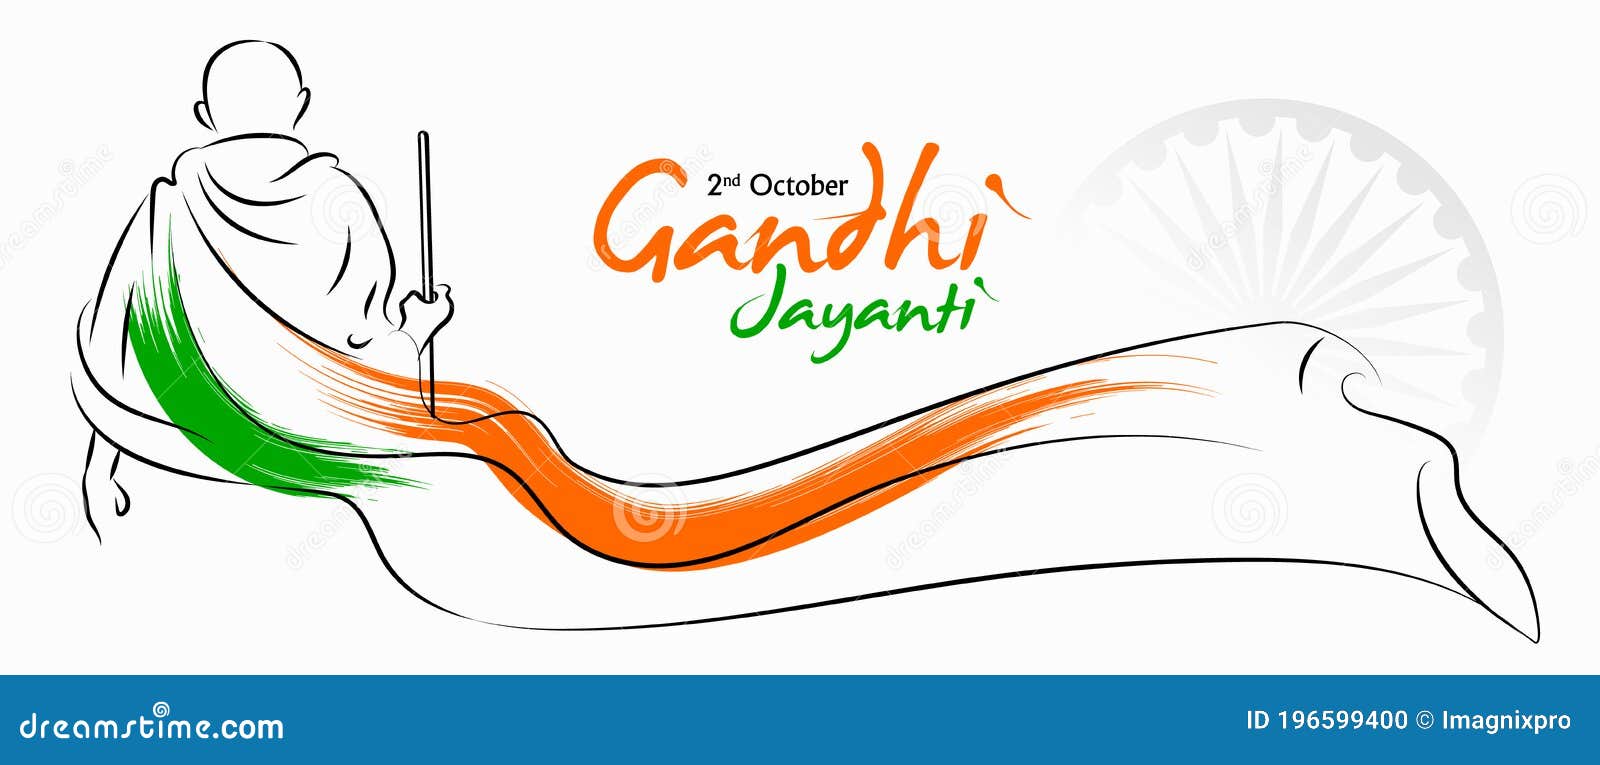 Vector Illustration Of A Background Or Poster For Happy Gandhi Jayanti Or  2nd October. Royalty Free SVG, Cliparts, Vectors, and Stock Illustration.  Image 129754172.